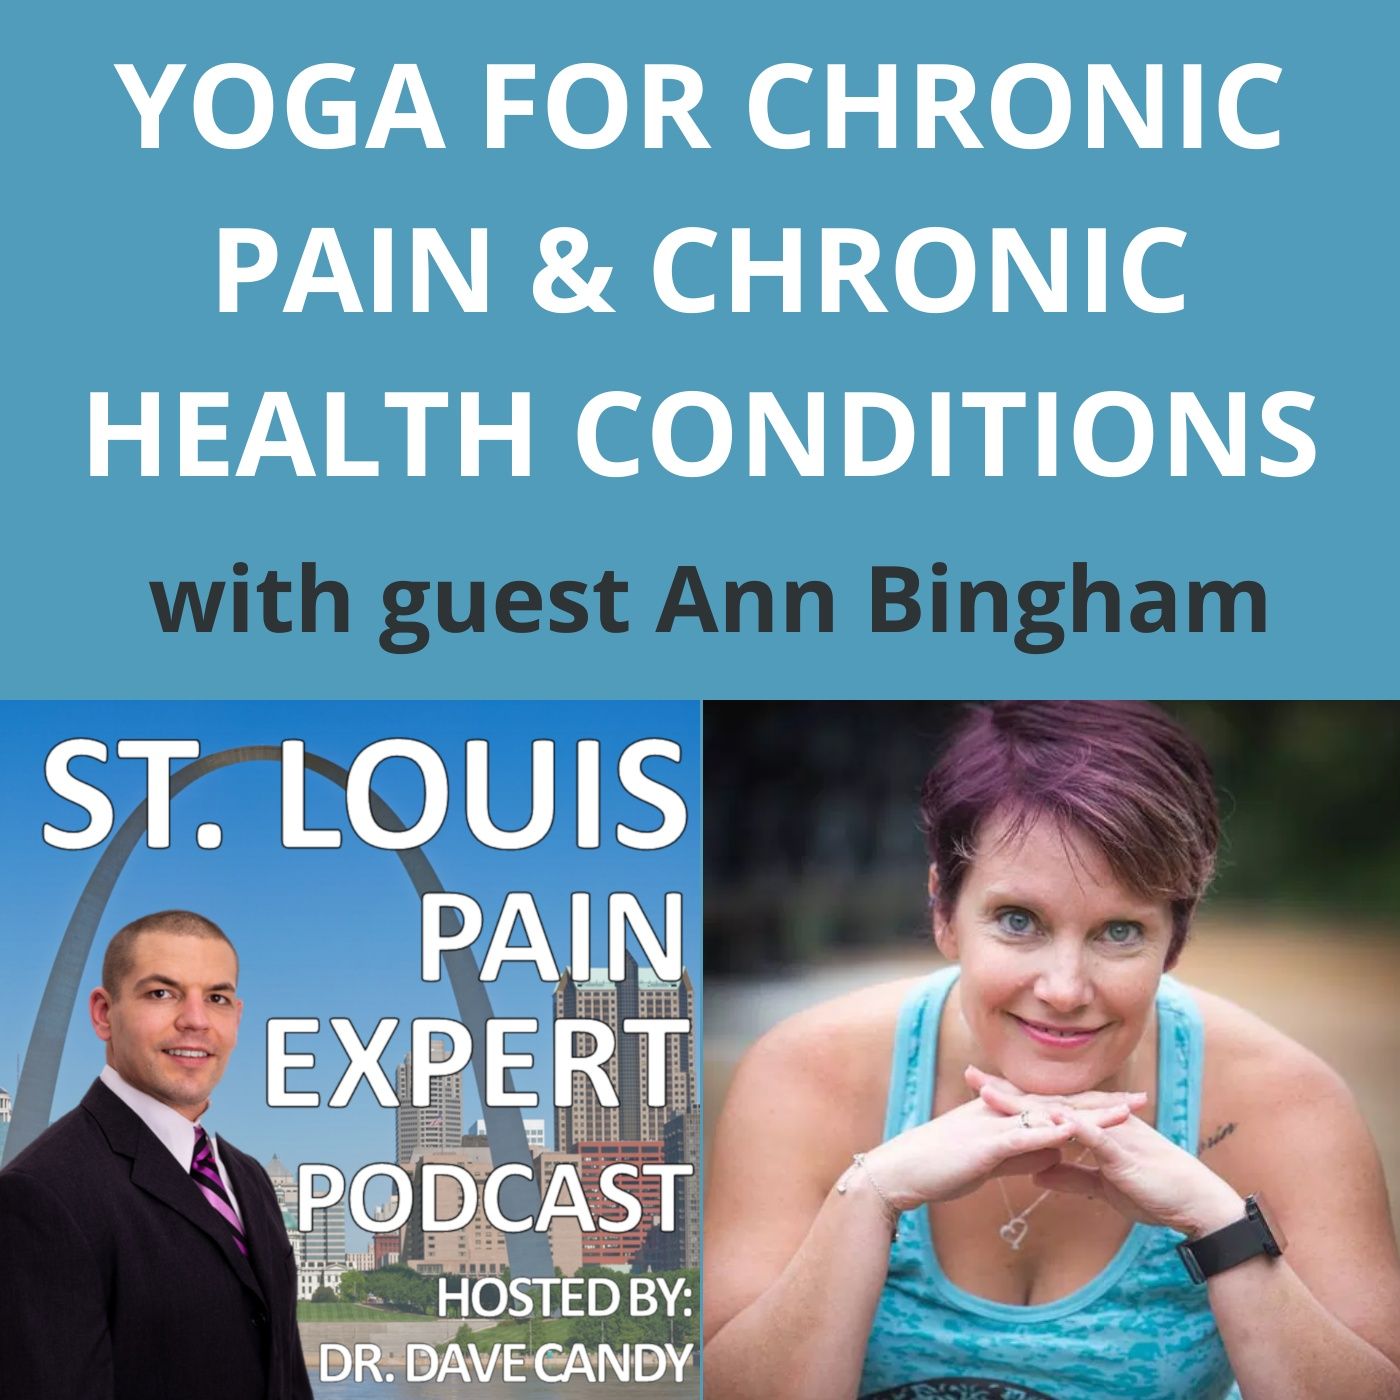 Yoga For Chronic Pain & Chronic Health Conditions With Guest Ann Bingham